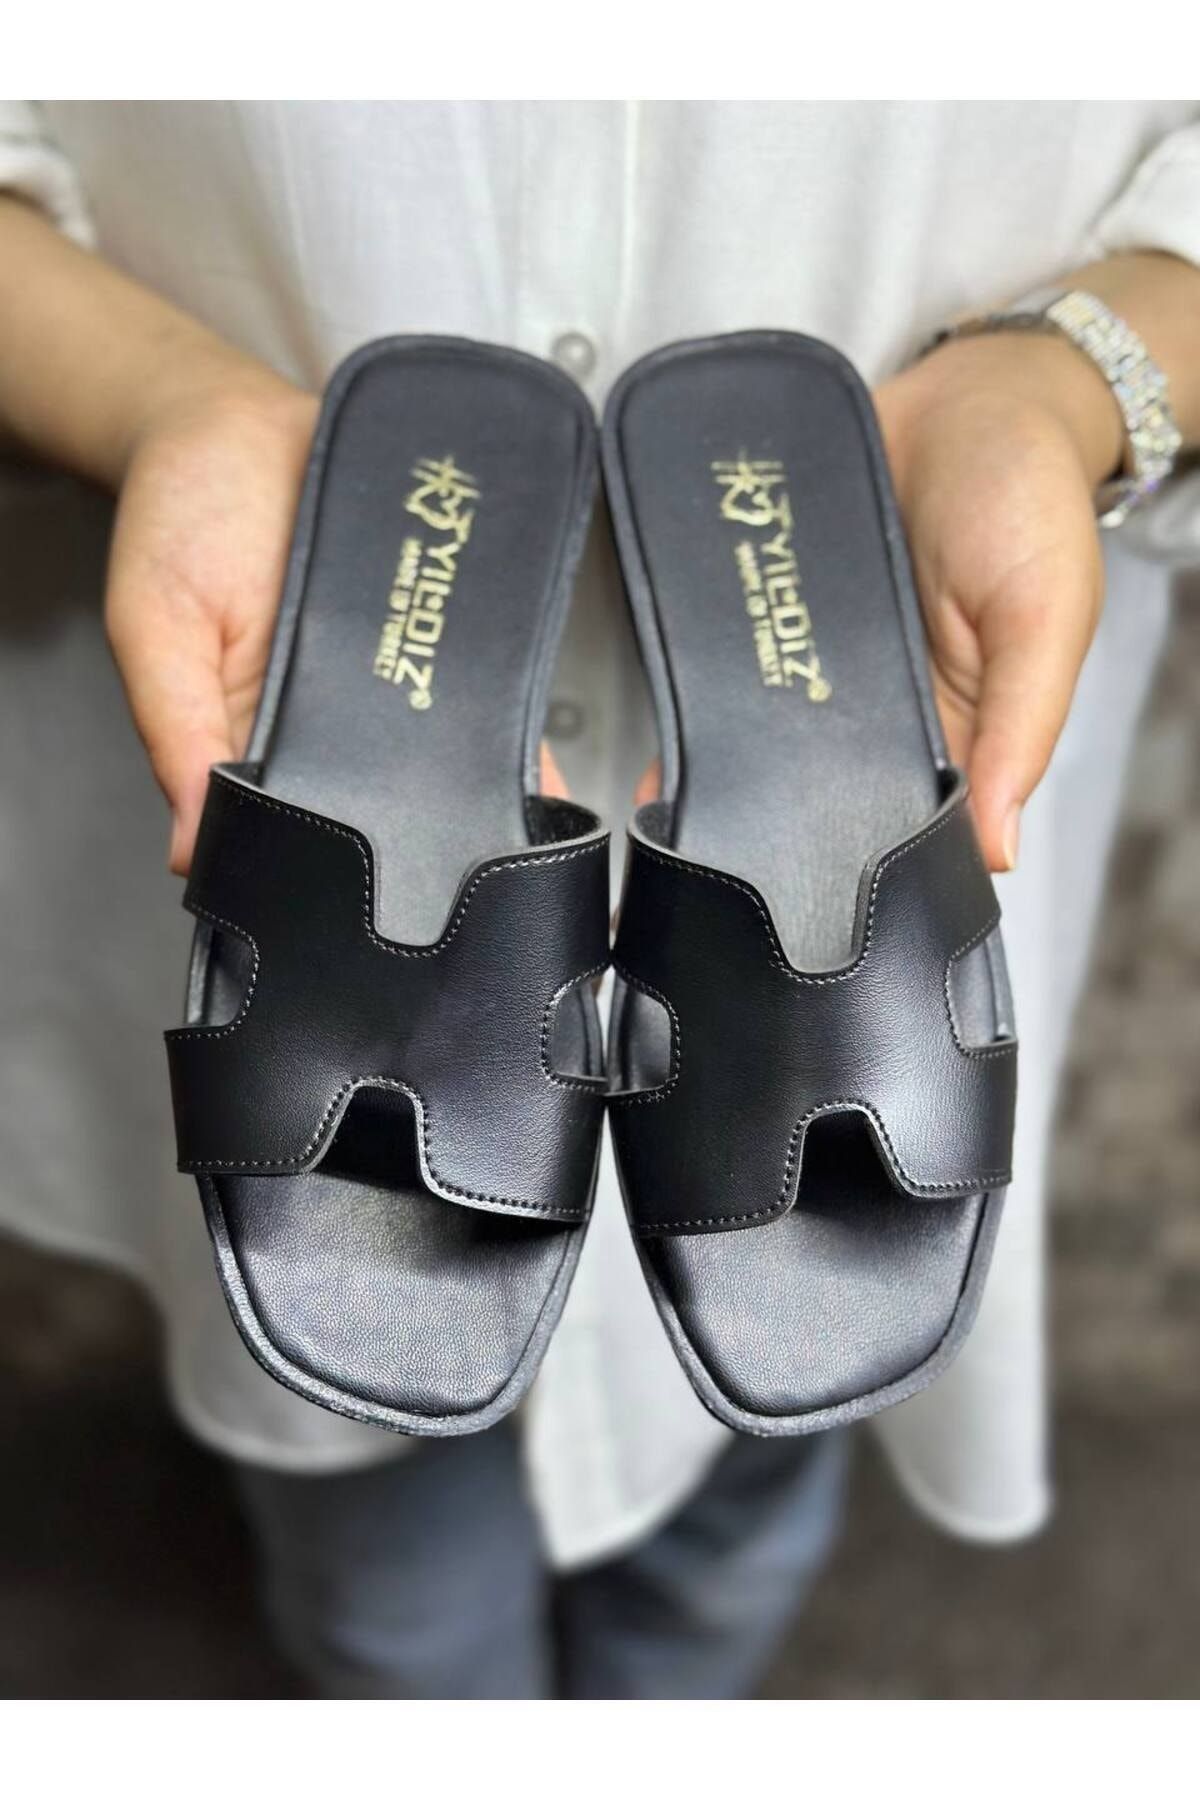 Shevalues Summer House Slippers for women Arch India | Ubuy